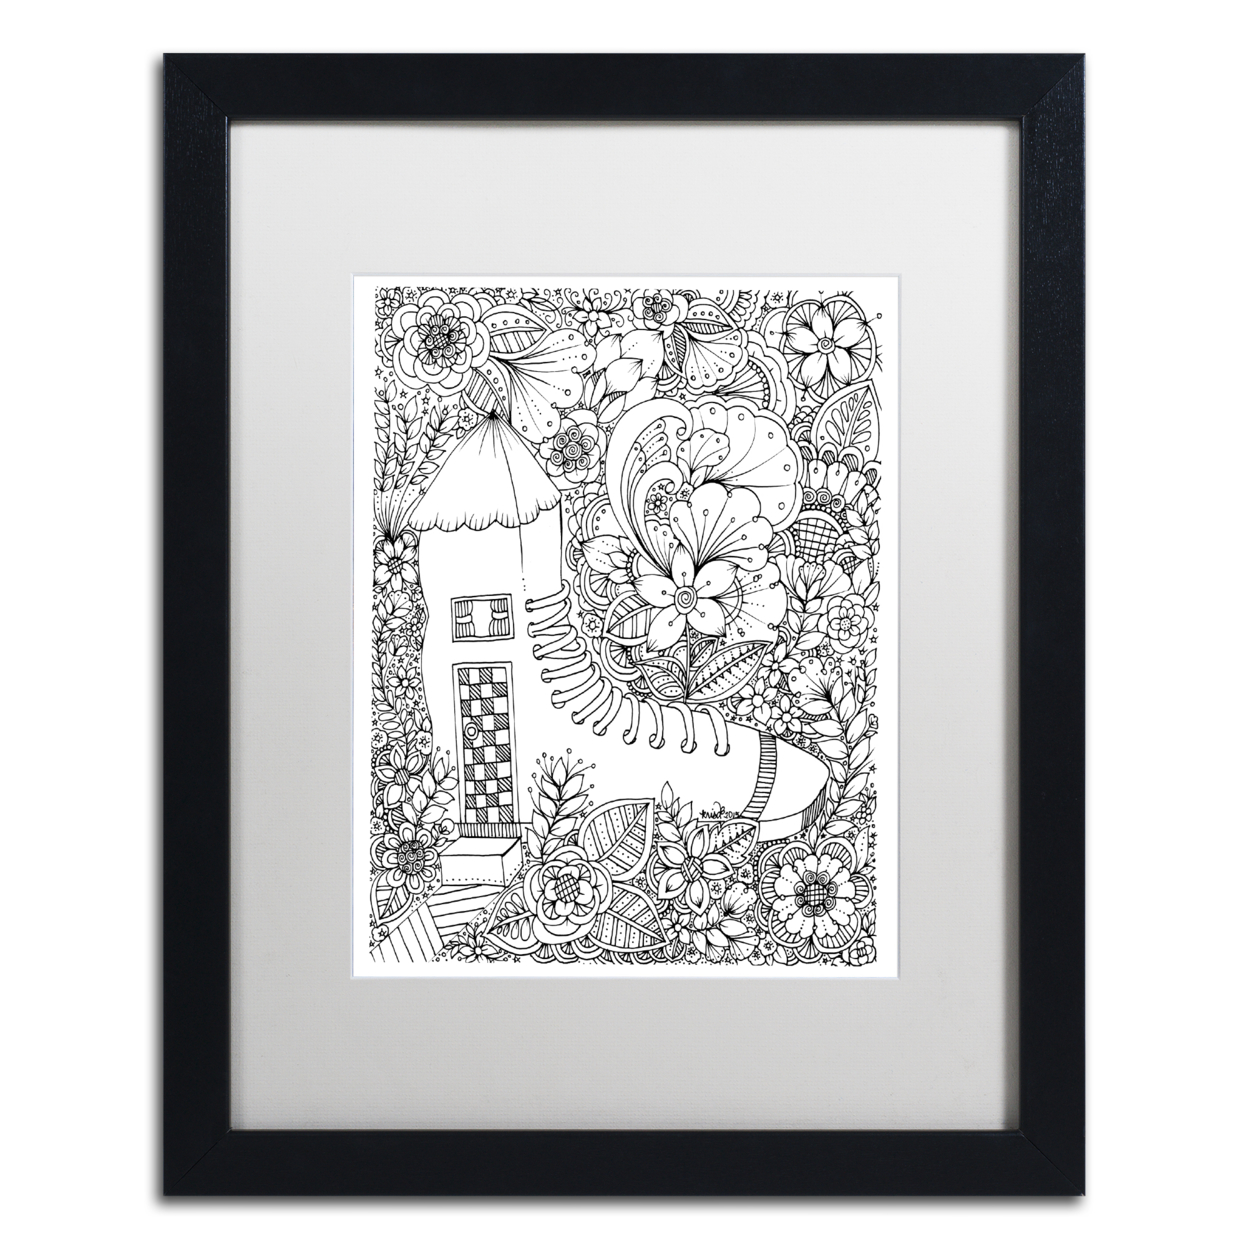 KCDoodleArt 'Shoe House' Black Wooden Framed Art 18 X 22 Inches